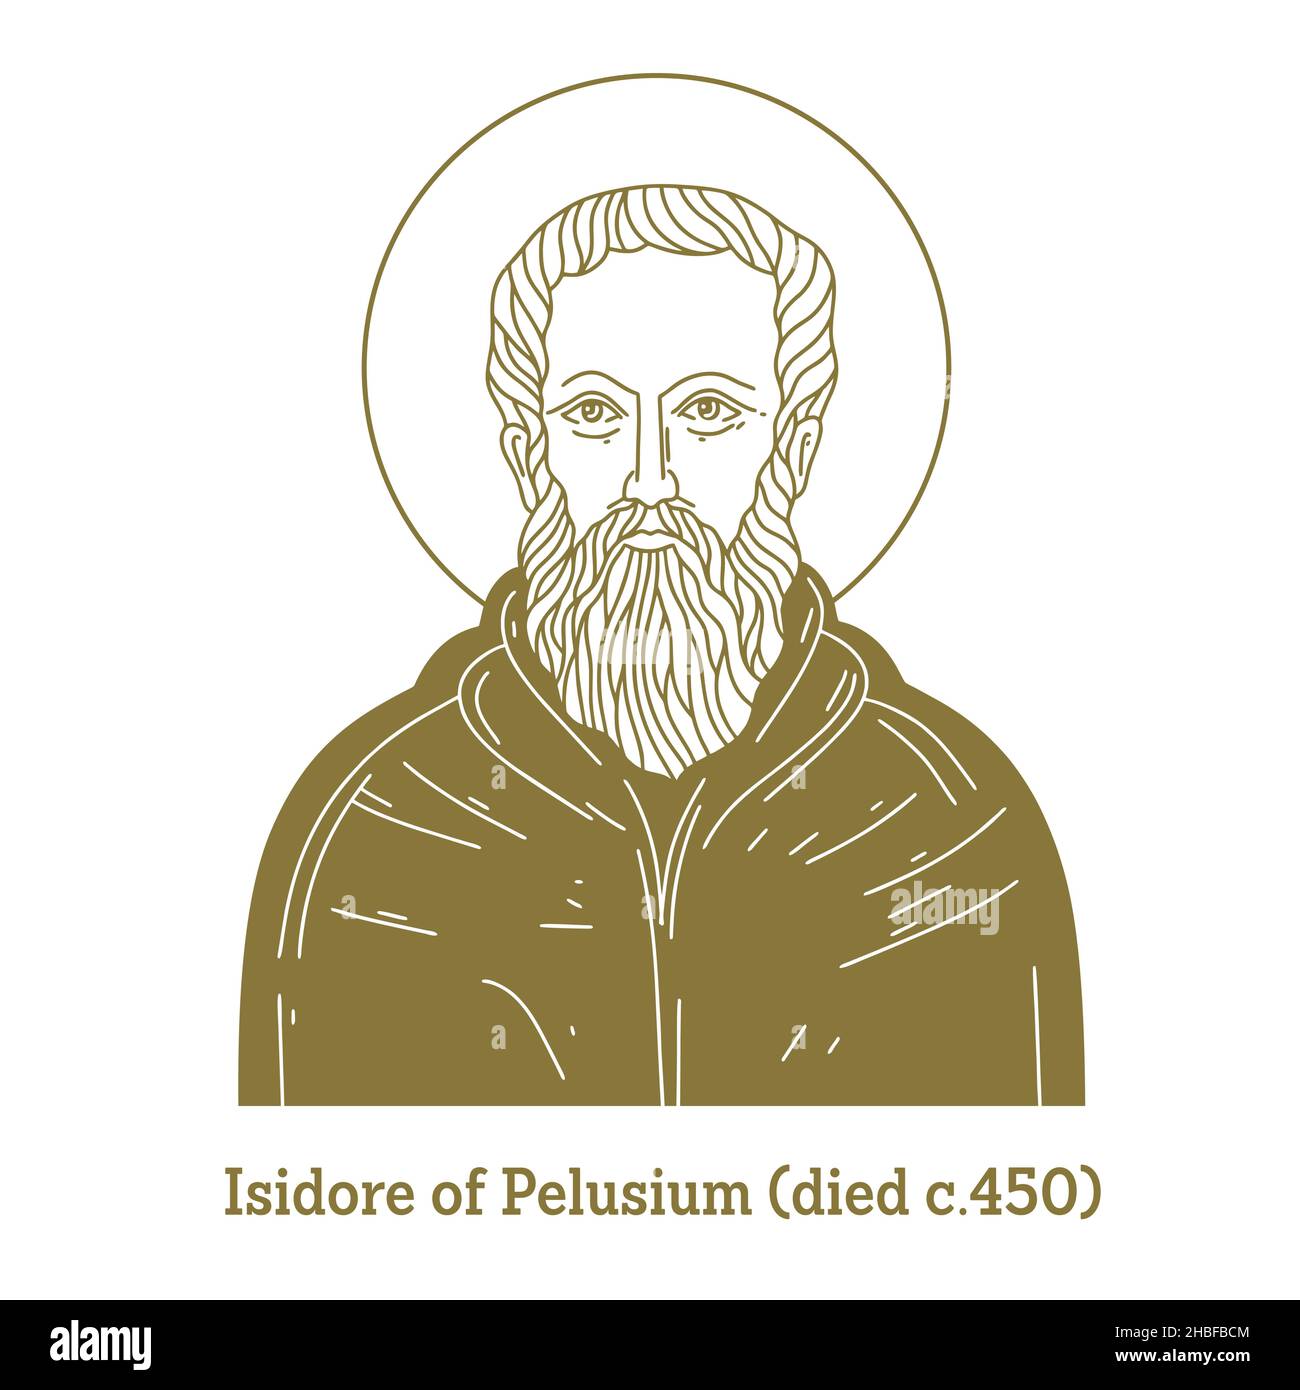 Isidore of Pelusium (died c.450) was born in Egypt to a prominent Alexandrian family. He became an ascetic, and moved to a mountain near the city Stock Vector